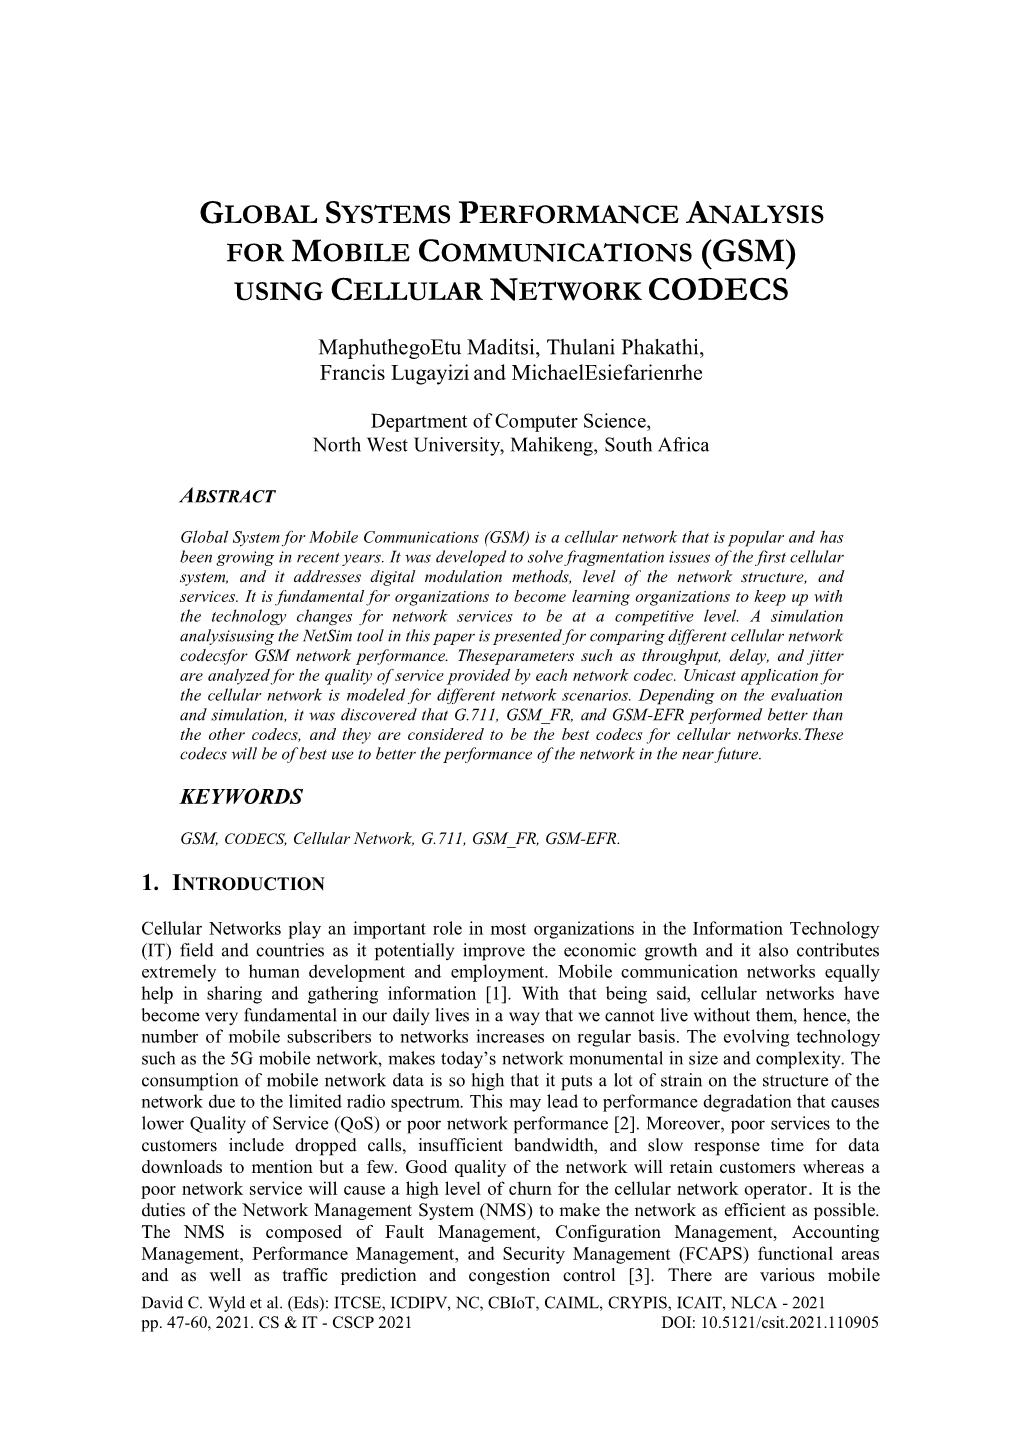 Global Systems Performance Analysis for Mobile Communications (Gsm) Using Cellular Network Codecs